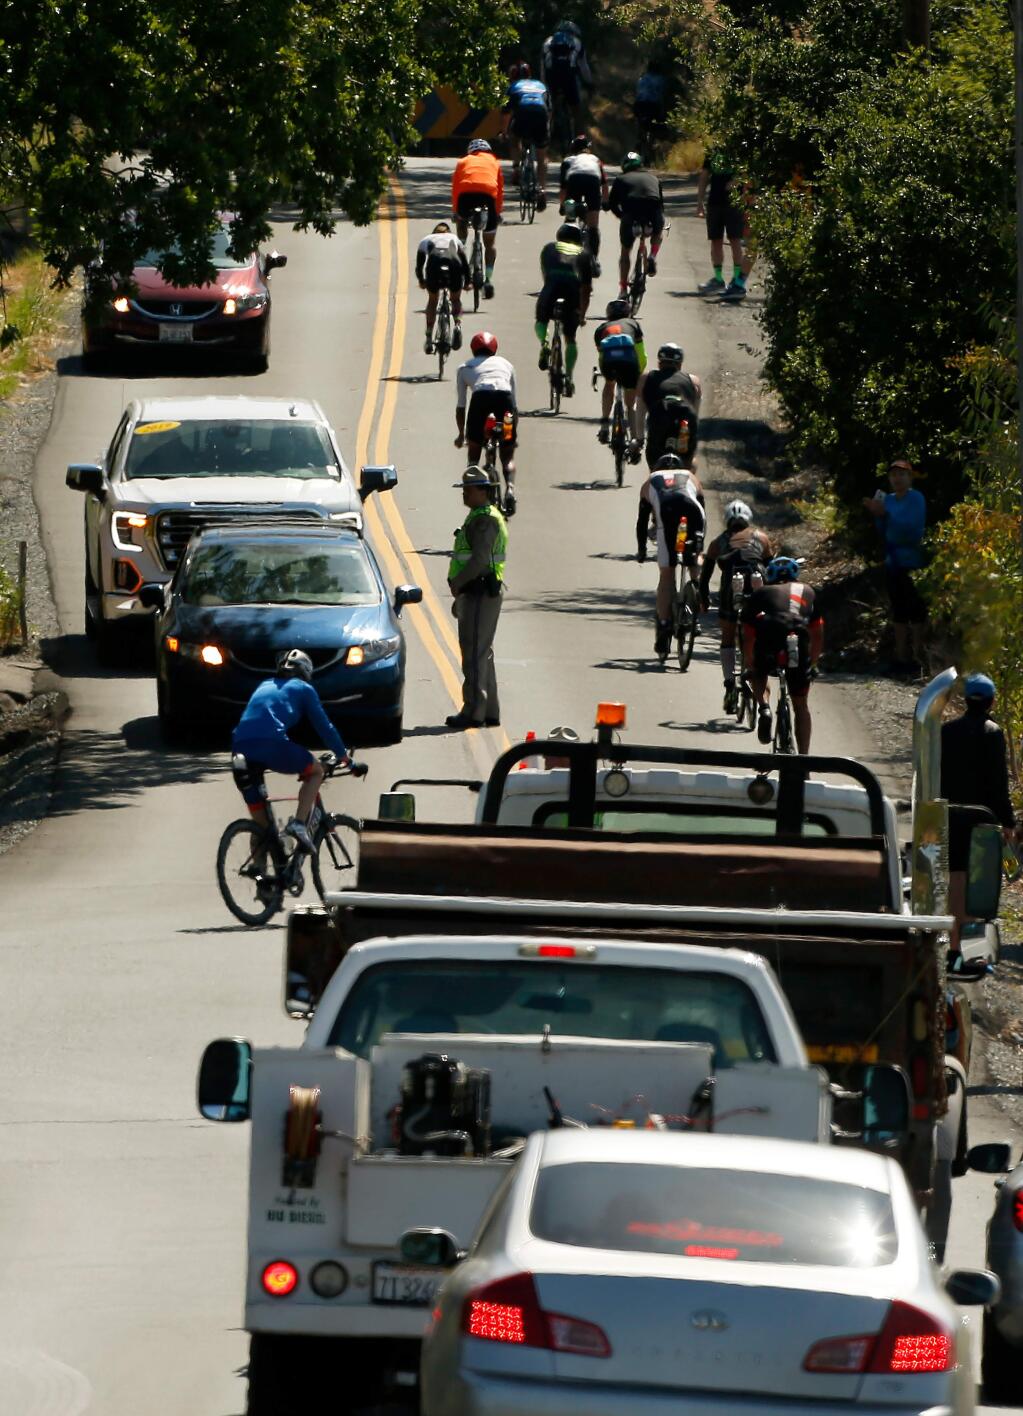 Motorists wait as triathletes turn onto Faught Road from Chalk Hill Road during the cycling stage of Ironman Santa Rosa in Windsor, California, on Saturday, May 11, 2019. (ALVIN JORNADA/ PD)